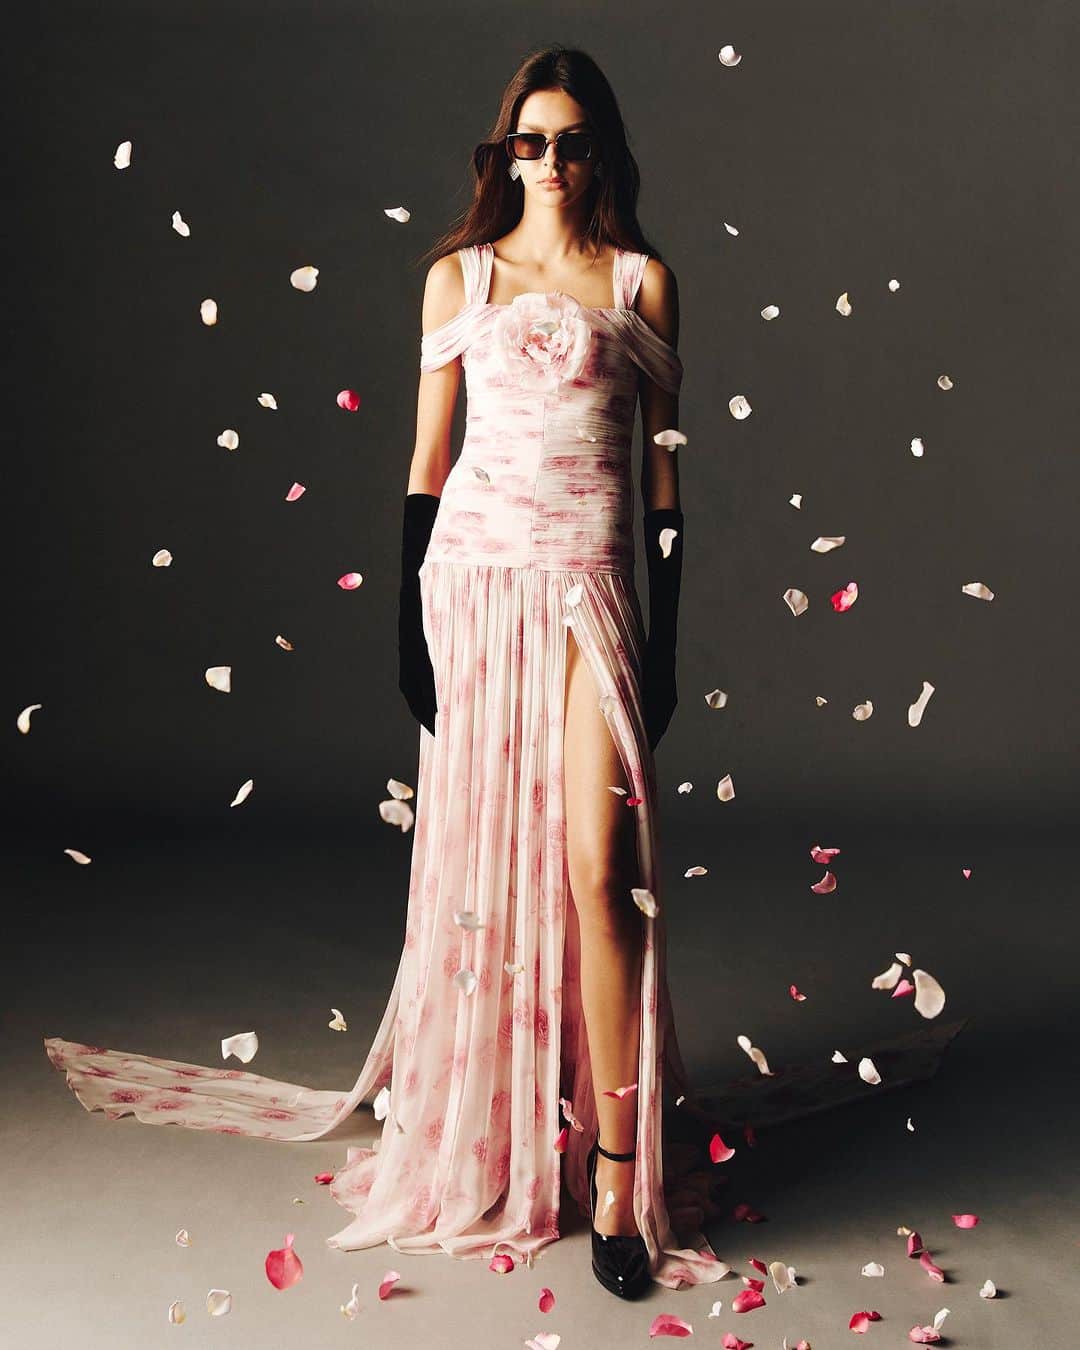 Sretsisのインスタグラム：「Kiss me Kate. Named after the climbing rose, this made-to-order ruched evening dress with wispy panels and hand-crafted rosette is made with 100% Rose Petal Georgette. Using 100 roses to make 1 meter of fabric, this sensual gown showcases Sretsis’ strive for novelty fabric development and craftsmanship. For more information contact Sretsis Flagship at 02 160 5874.」